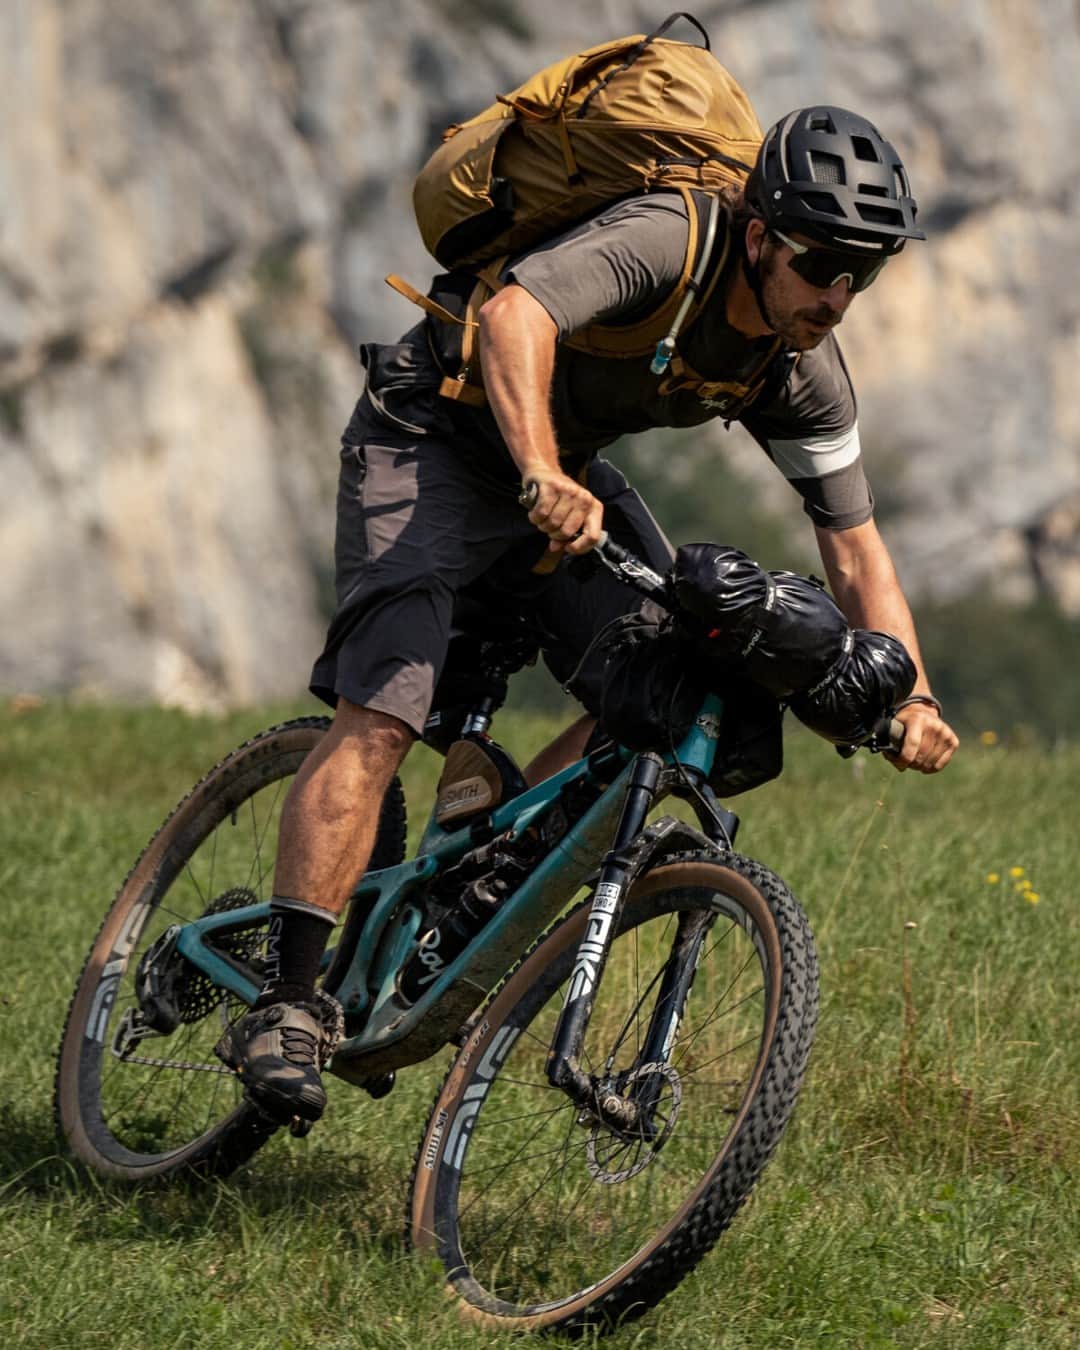 Smithのインスタグラム：「While @joeyschusler is known for his sendier accolades, exploring the remote mountains has long been a dream of his. This summer, he set out on a personal quest: a solo bikepacking trip from Munich to Milan. Head to the Smith Blog to hear more about Joey's adventure.」